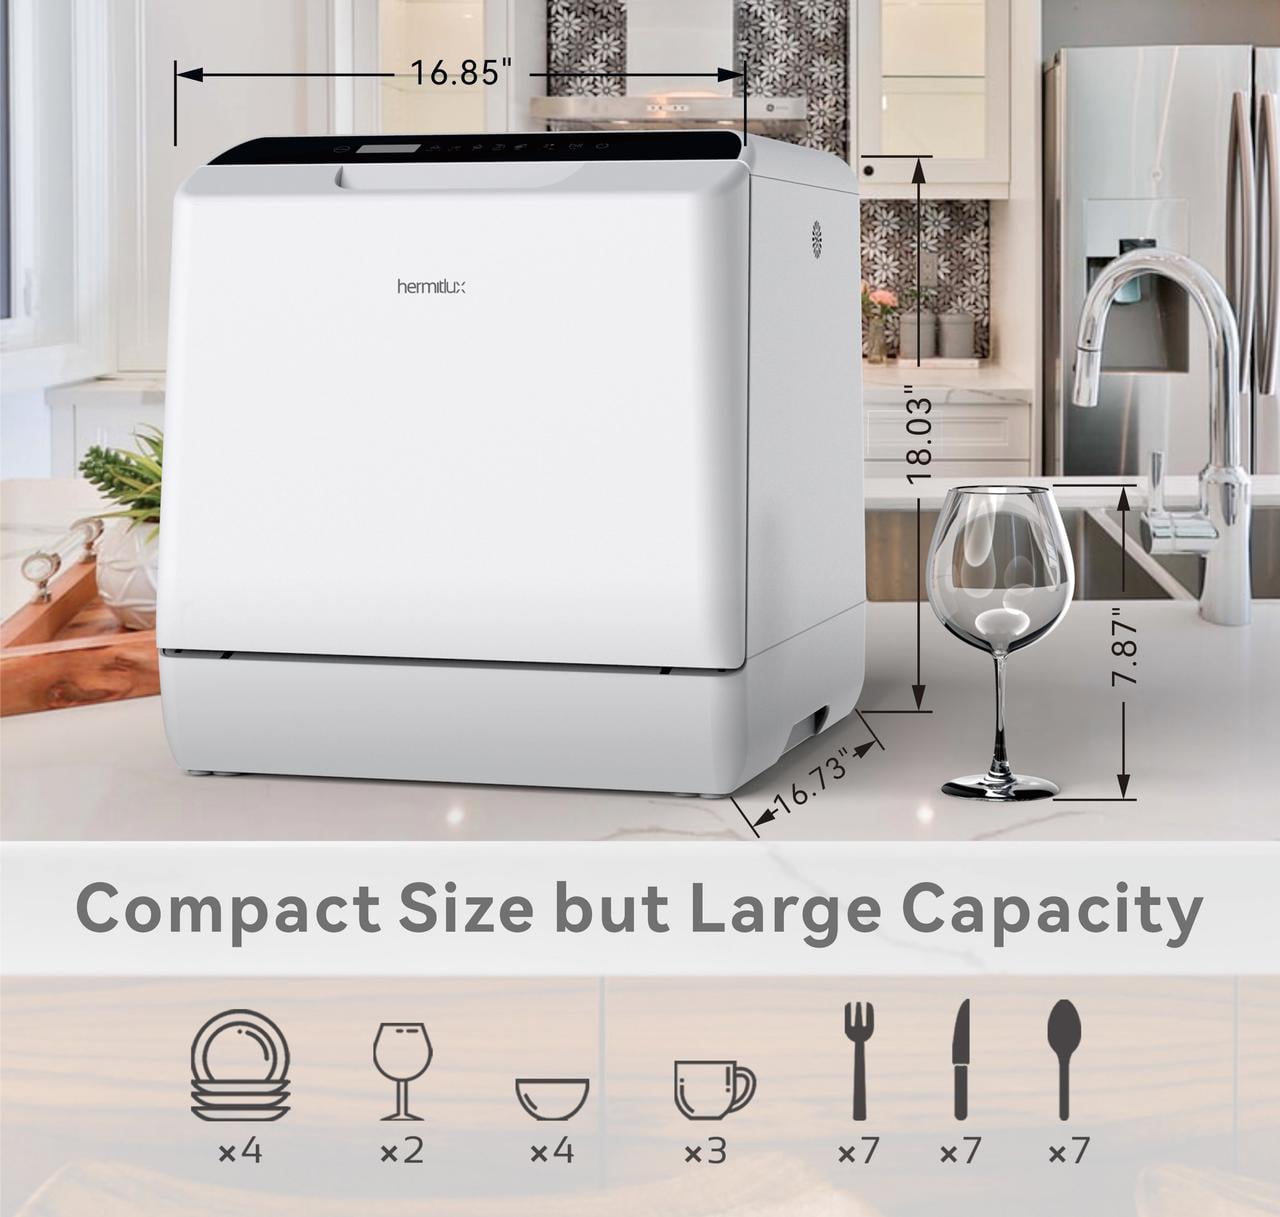 Portable Countertop Dishwasher, 5 Washing Programs Mini Dishwasher with 5L Built-in Water Tank & Inlet Hose, Baby Care & Fruit Wash for Small Apartment, Dorms, RVs -White - 2